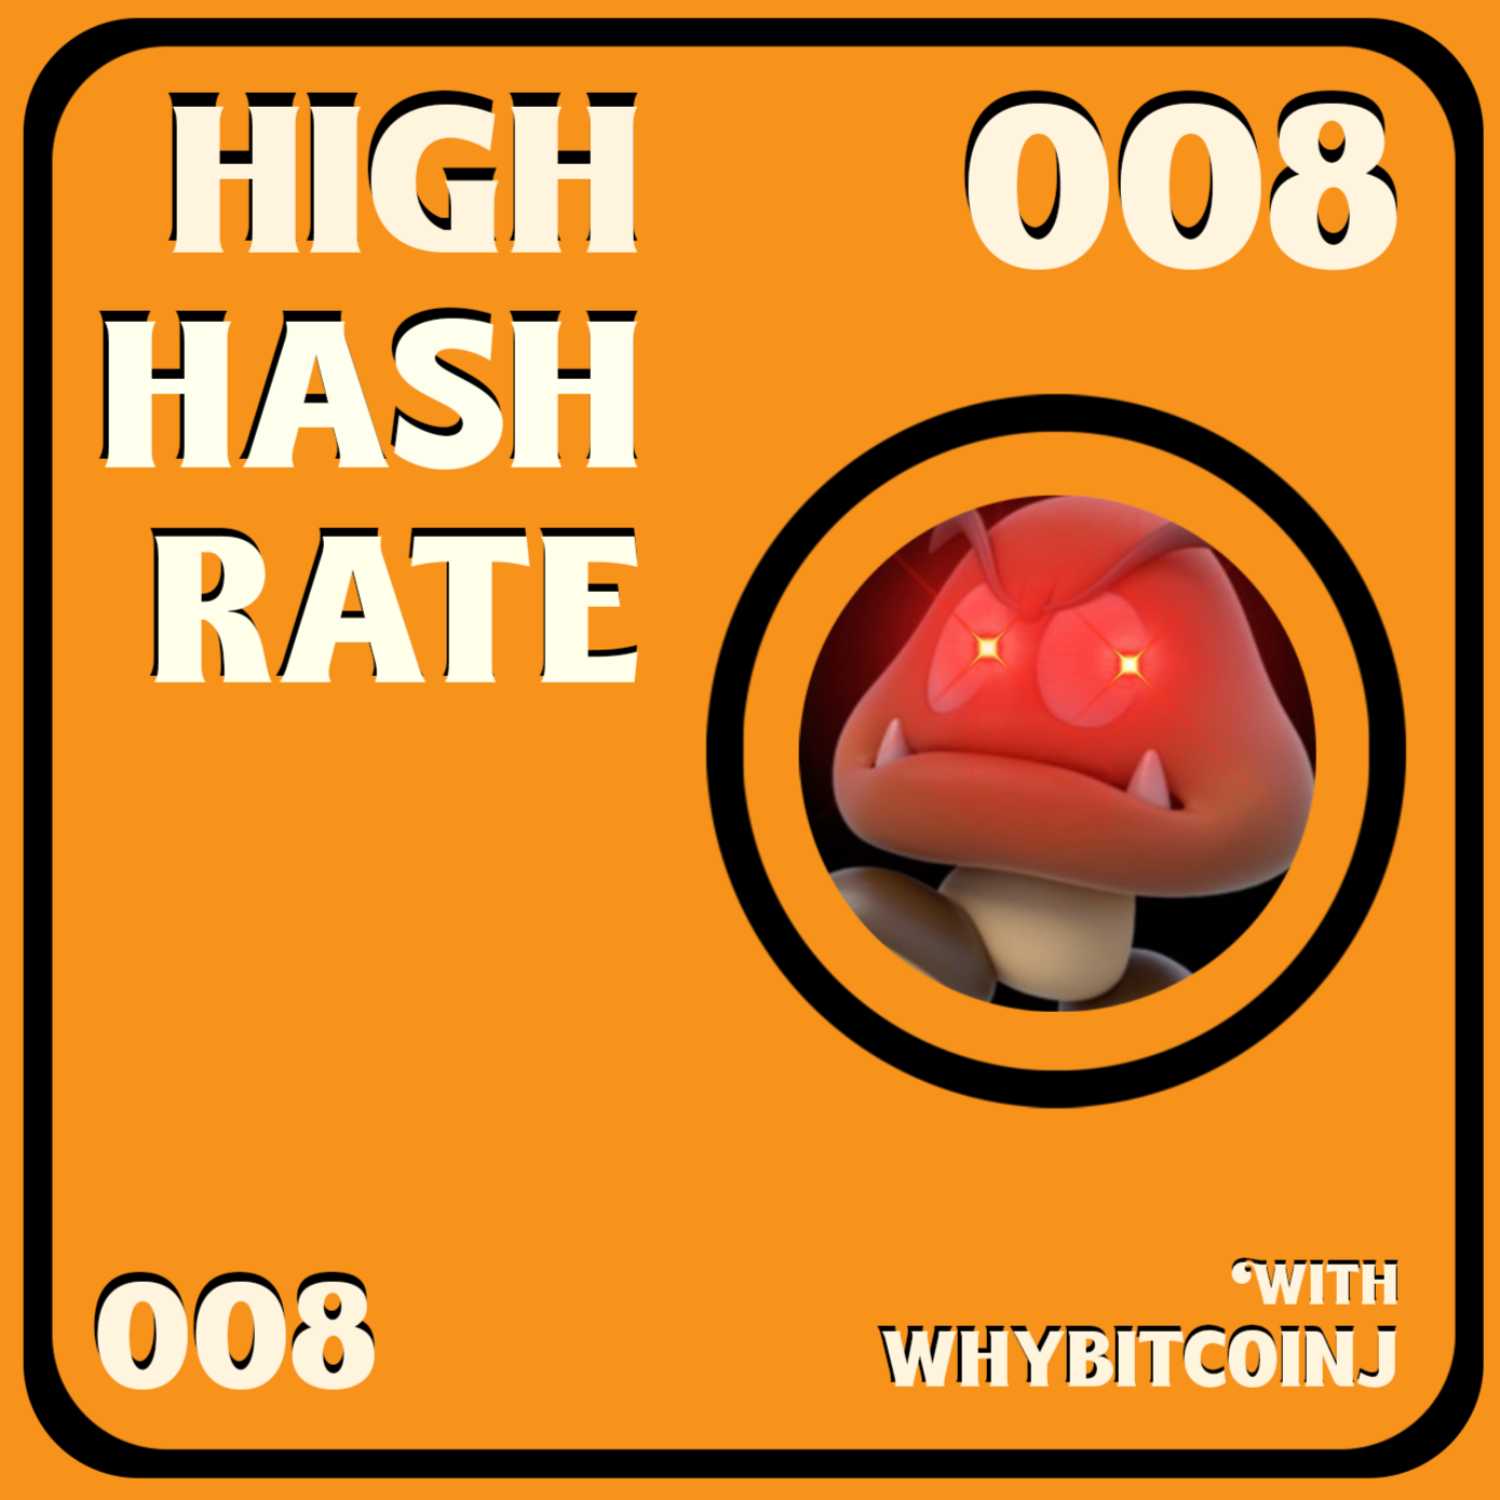 Own Nothing But Bitcoin with WhyBitcoinJ - HHR008